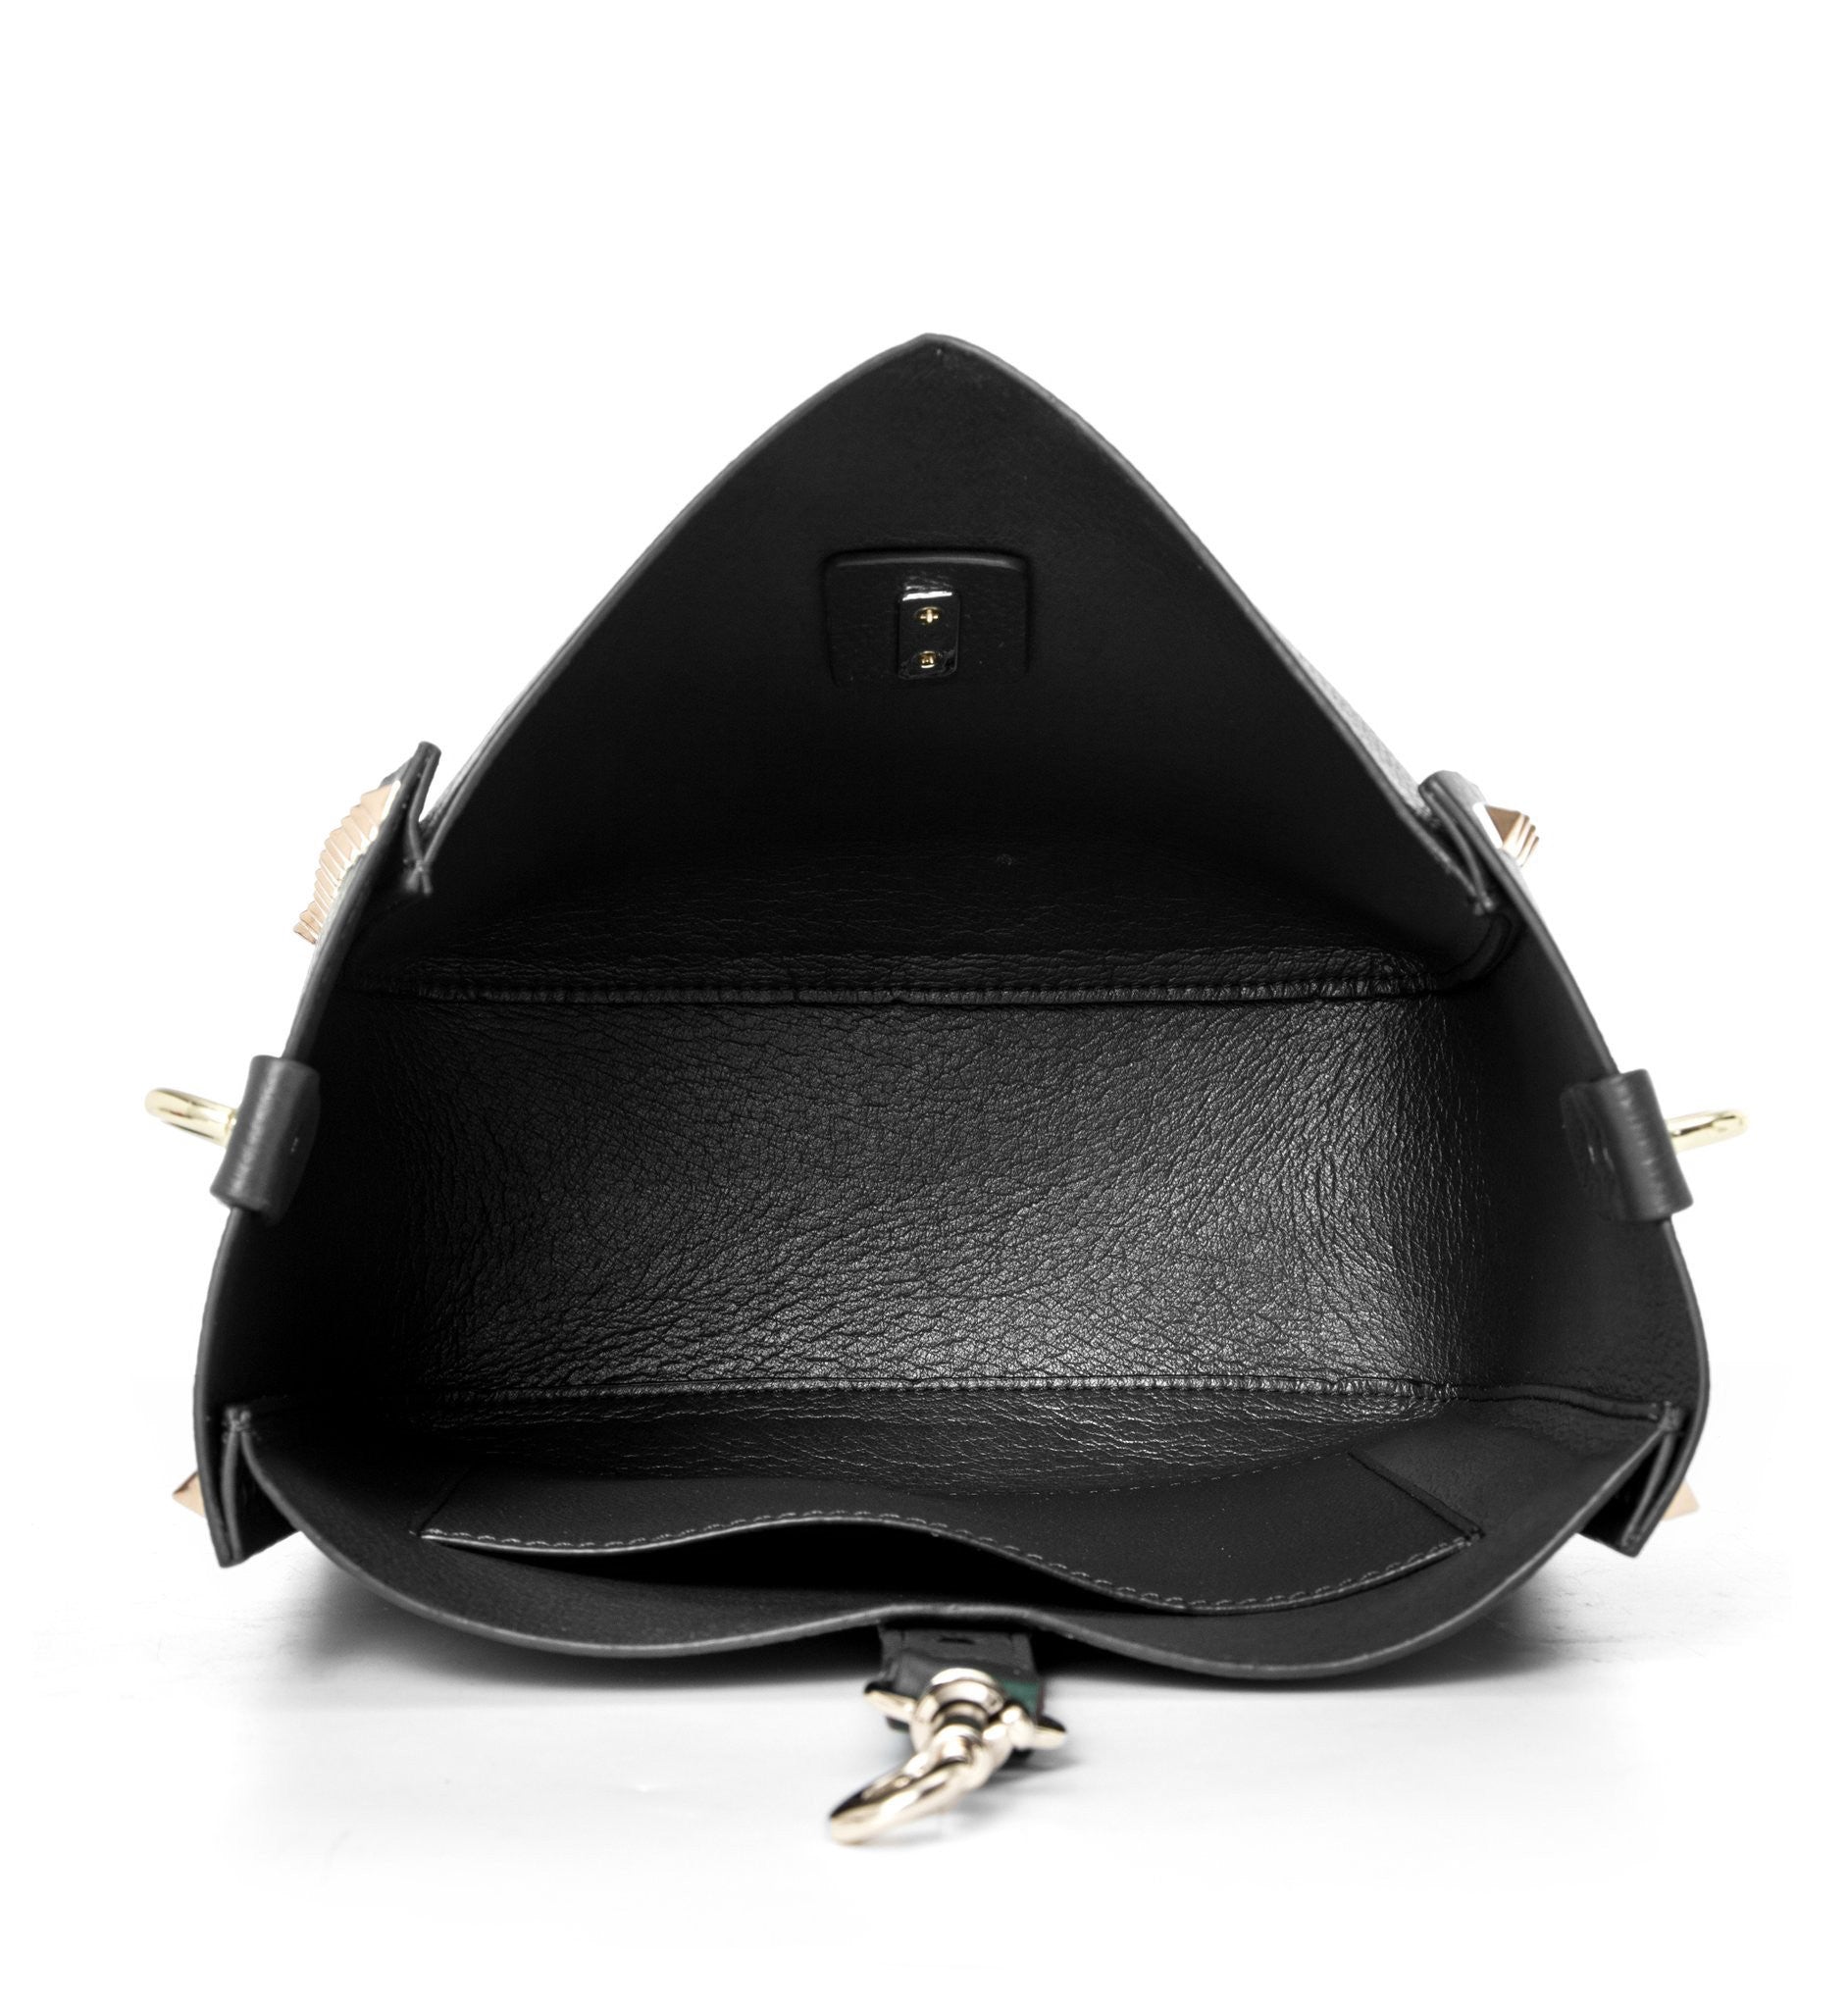 Women's genuine cowhide leather handbag Gloria design comes with one pouch by Tomorrow Closet